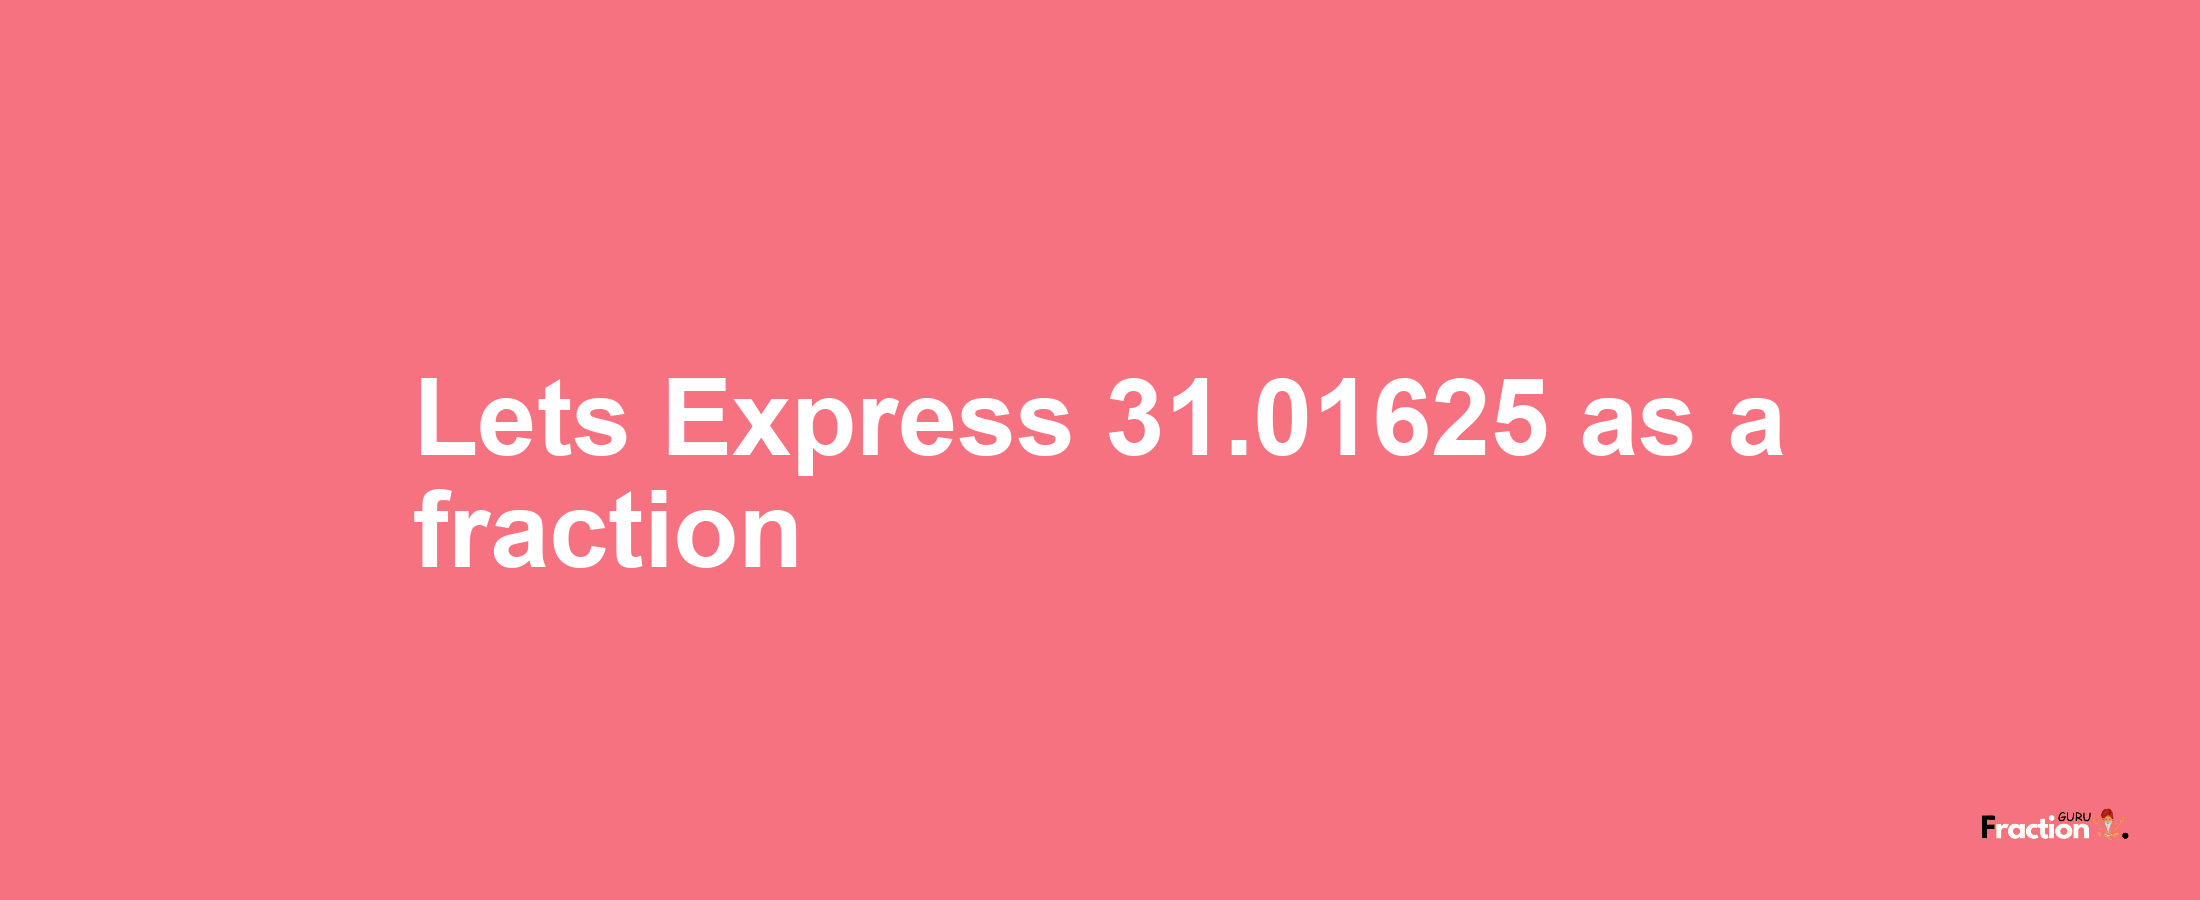 Lets Express 31.01625 as afraction